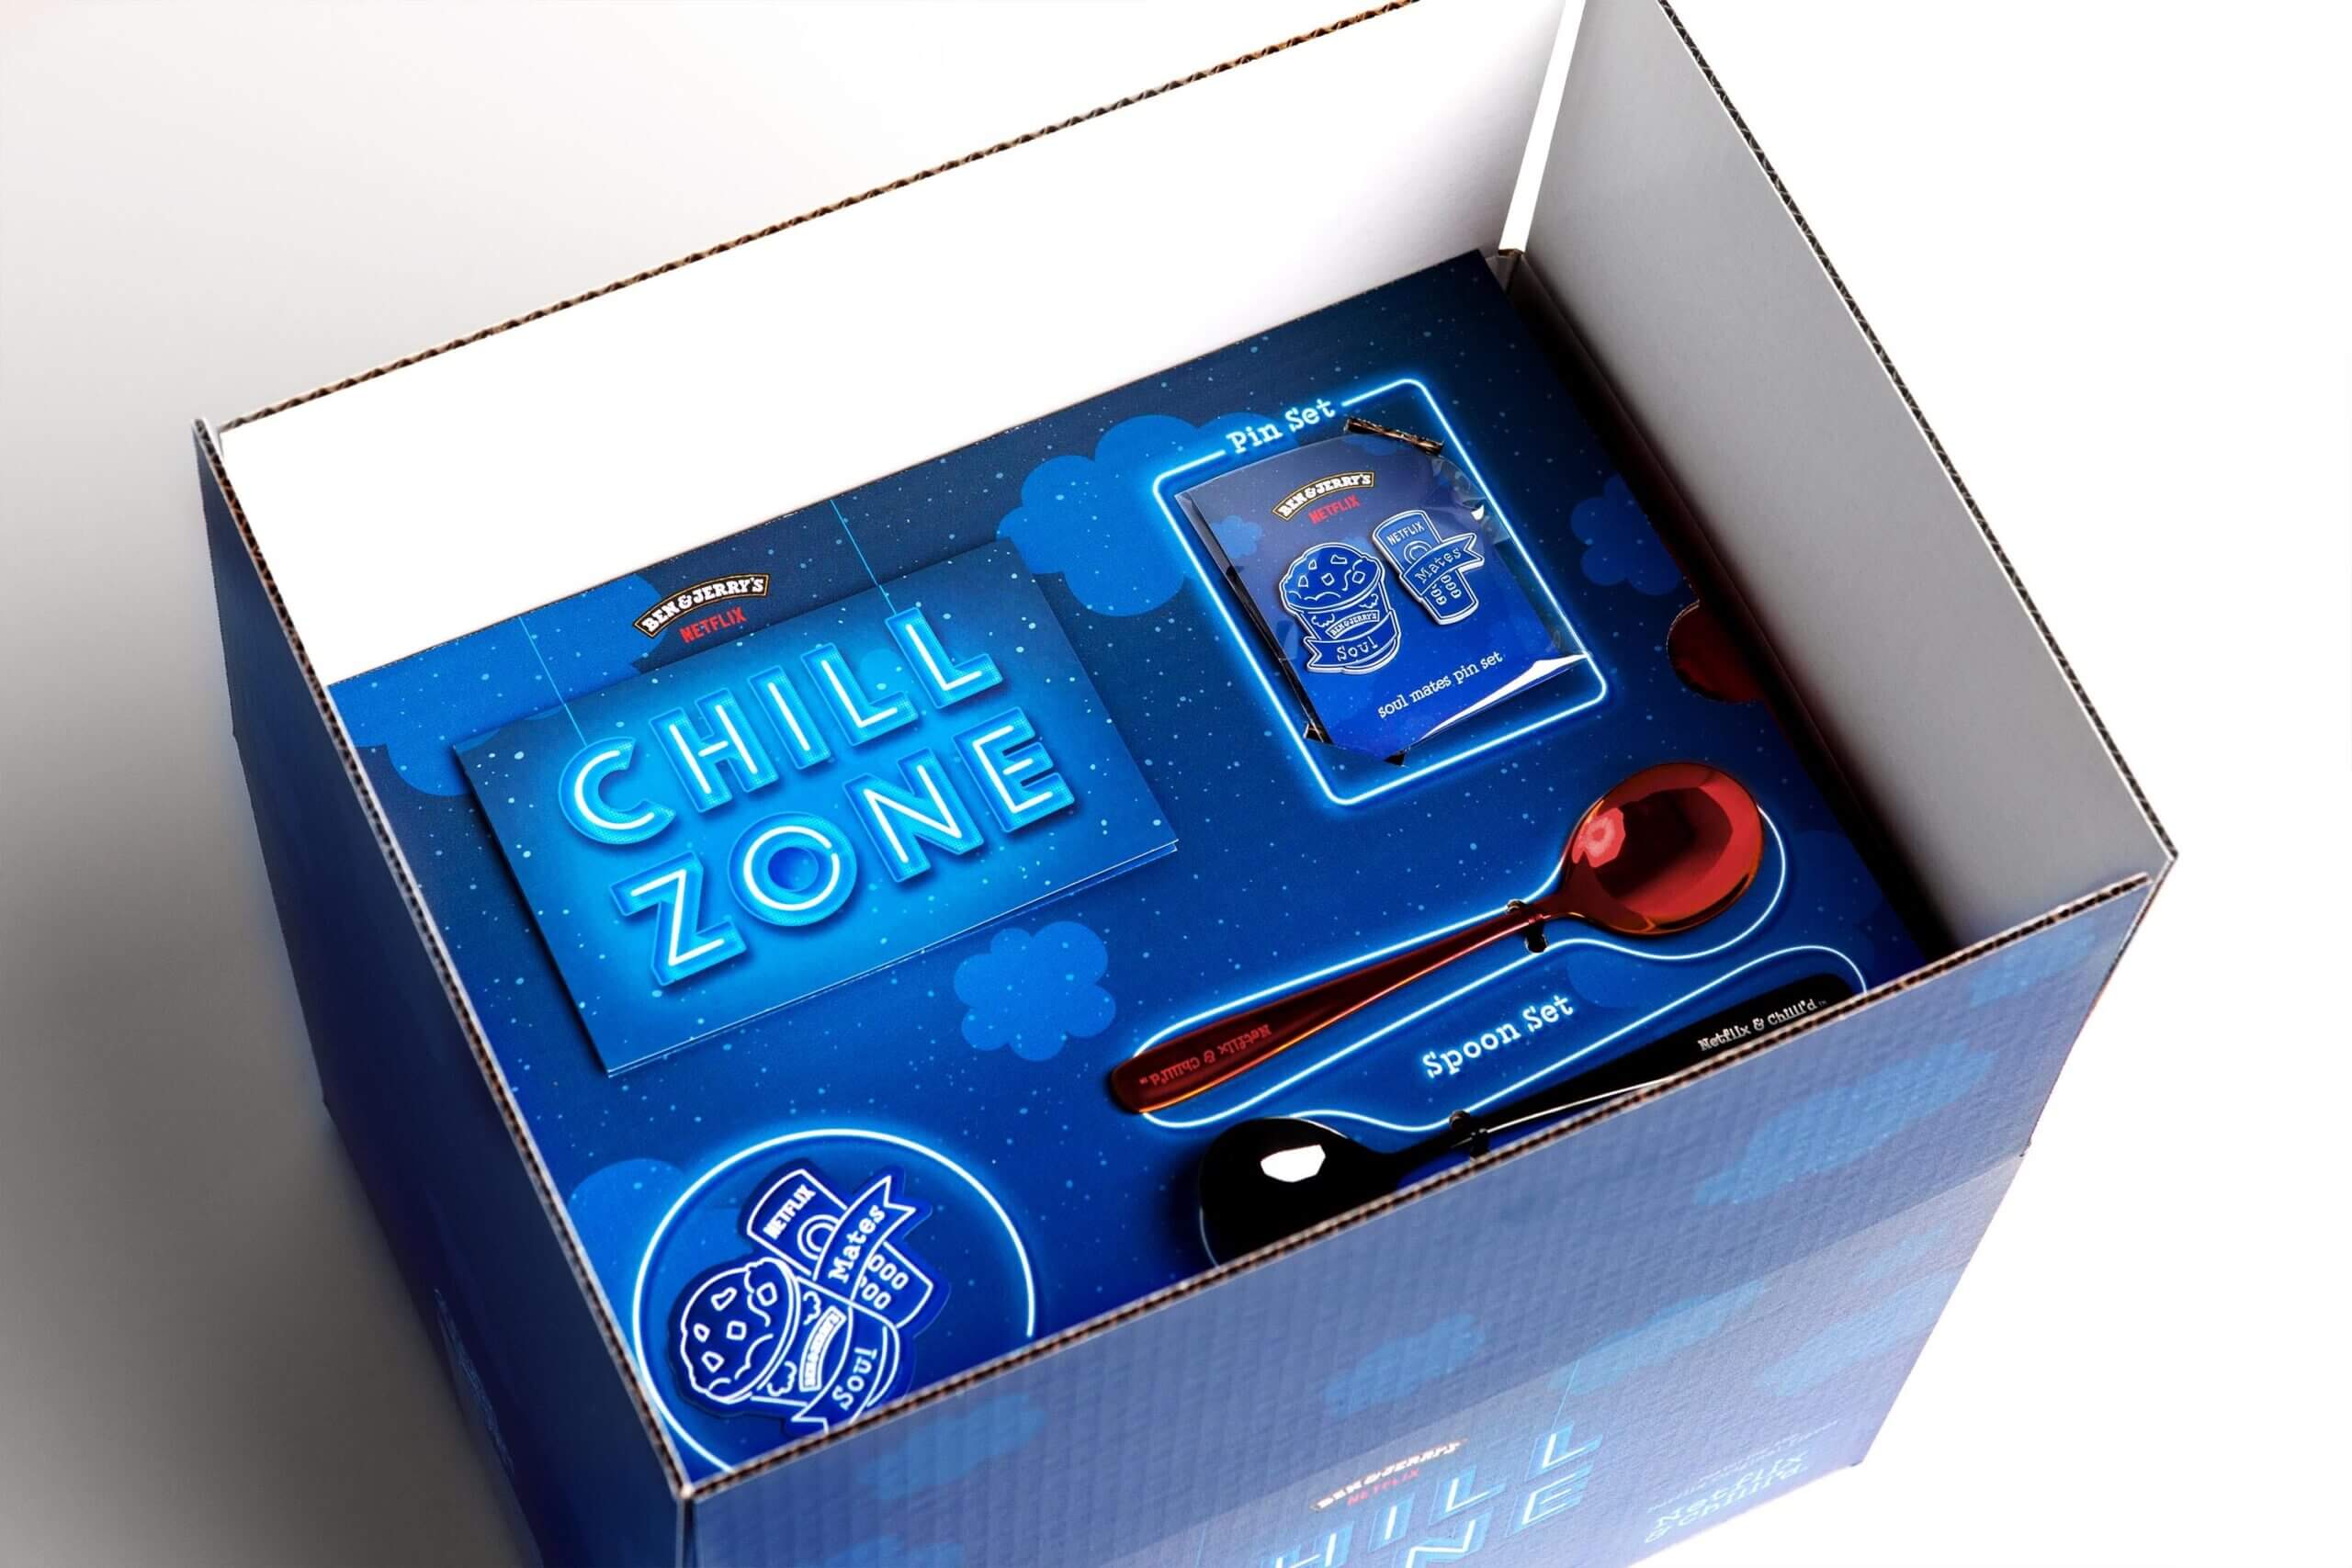 A box of Ben & Jerry's merchandise which reads "Chill Zone"